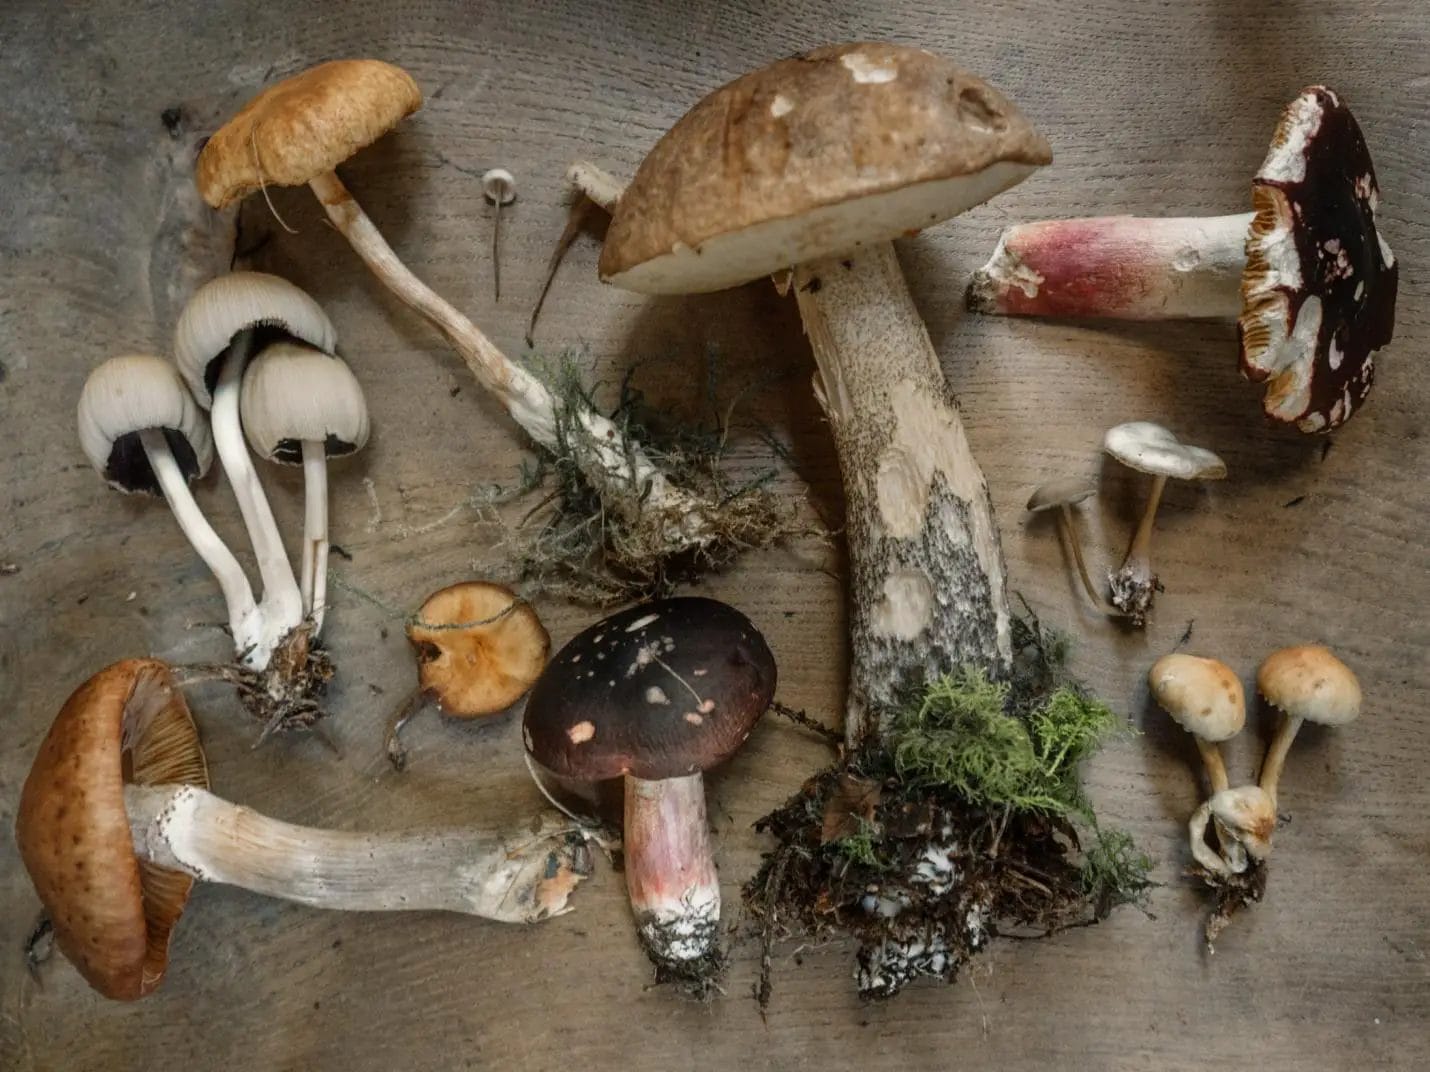 Mushroom-based diet and its benefits